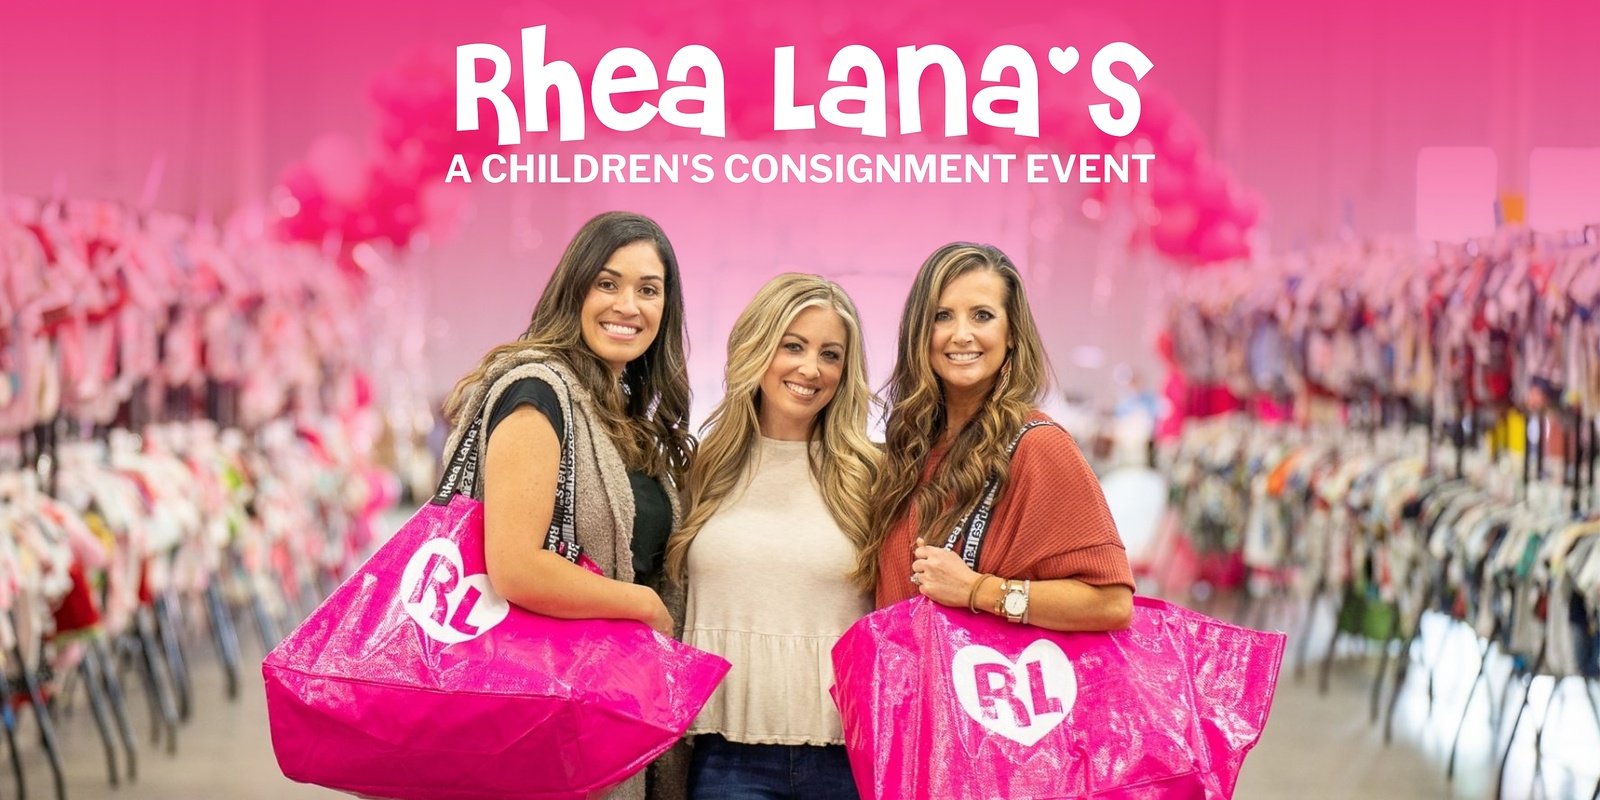 Banner image for Rhea Lana's of Conway HUGE Back to School & Fall/Winter Family Shopping Event!